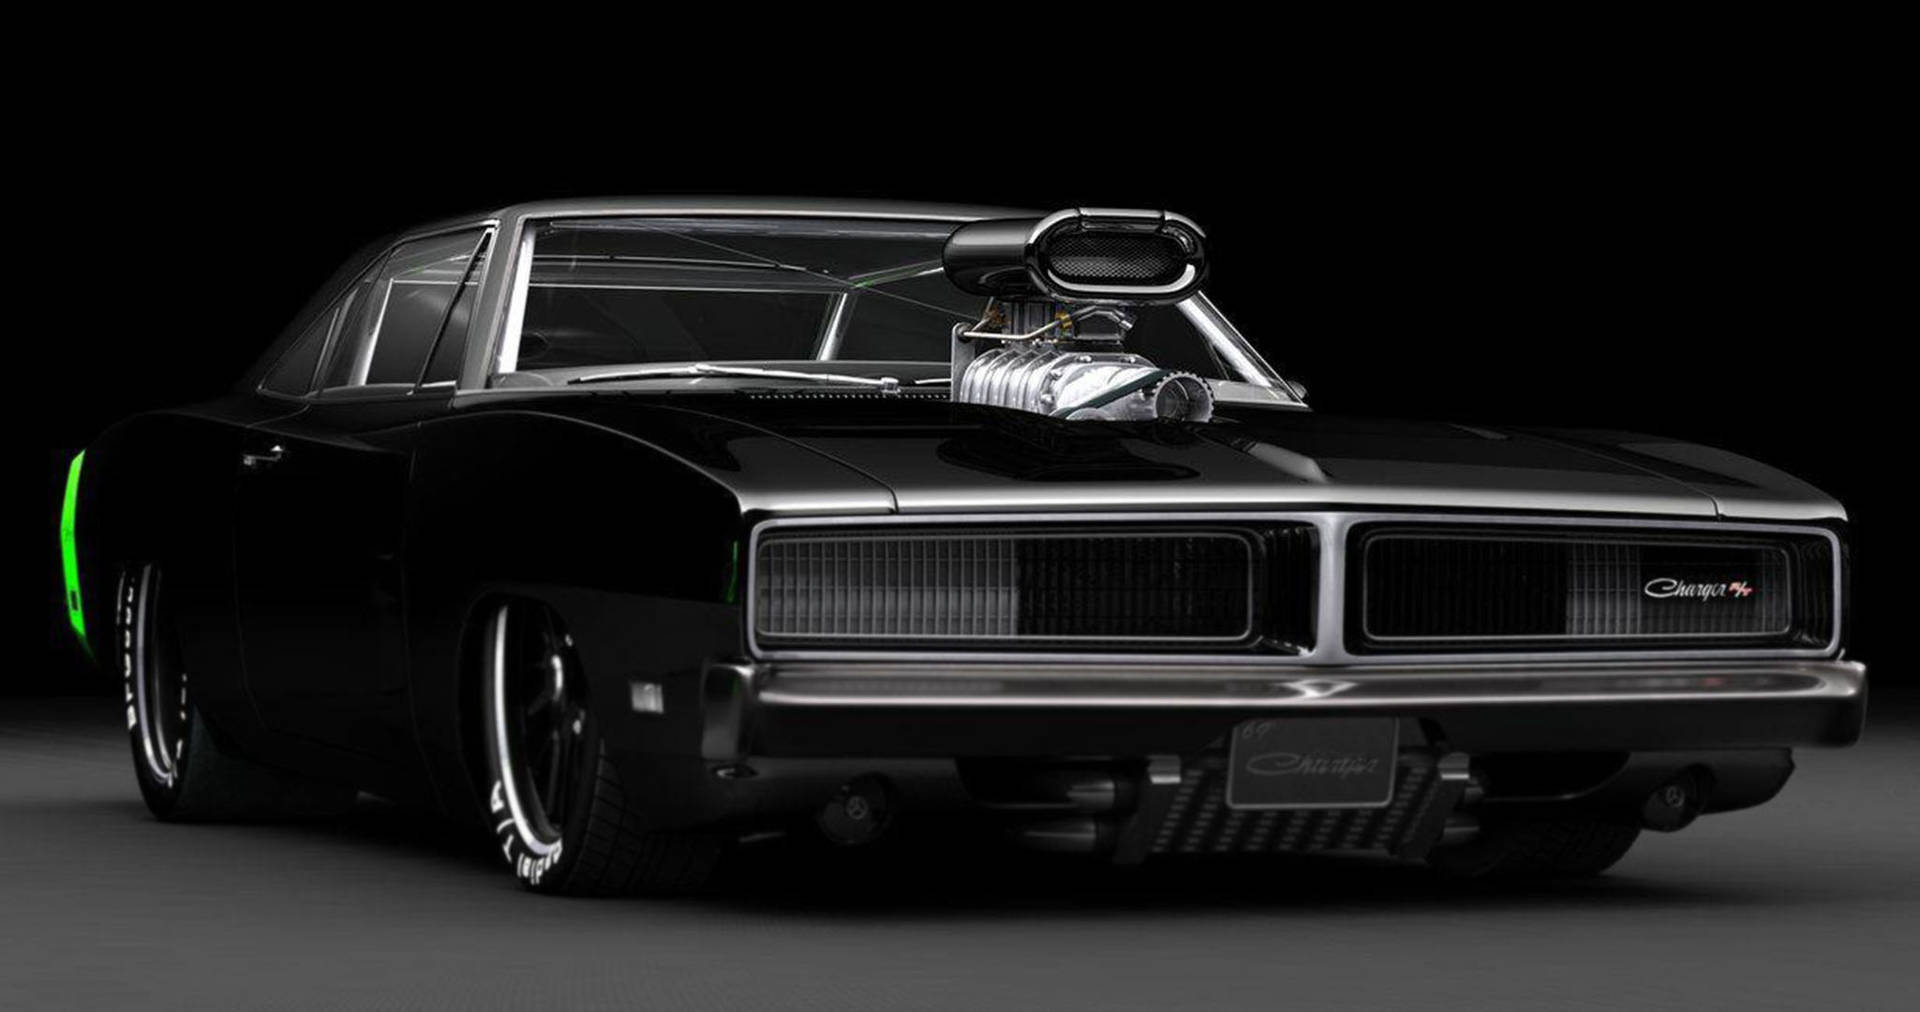 1969 Dodge Charger Blower Wallpaper